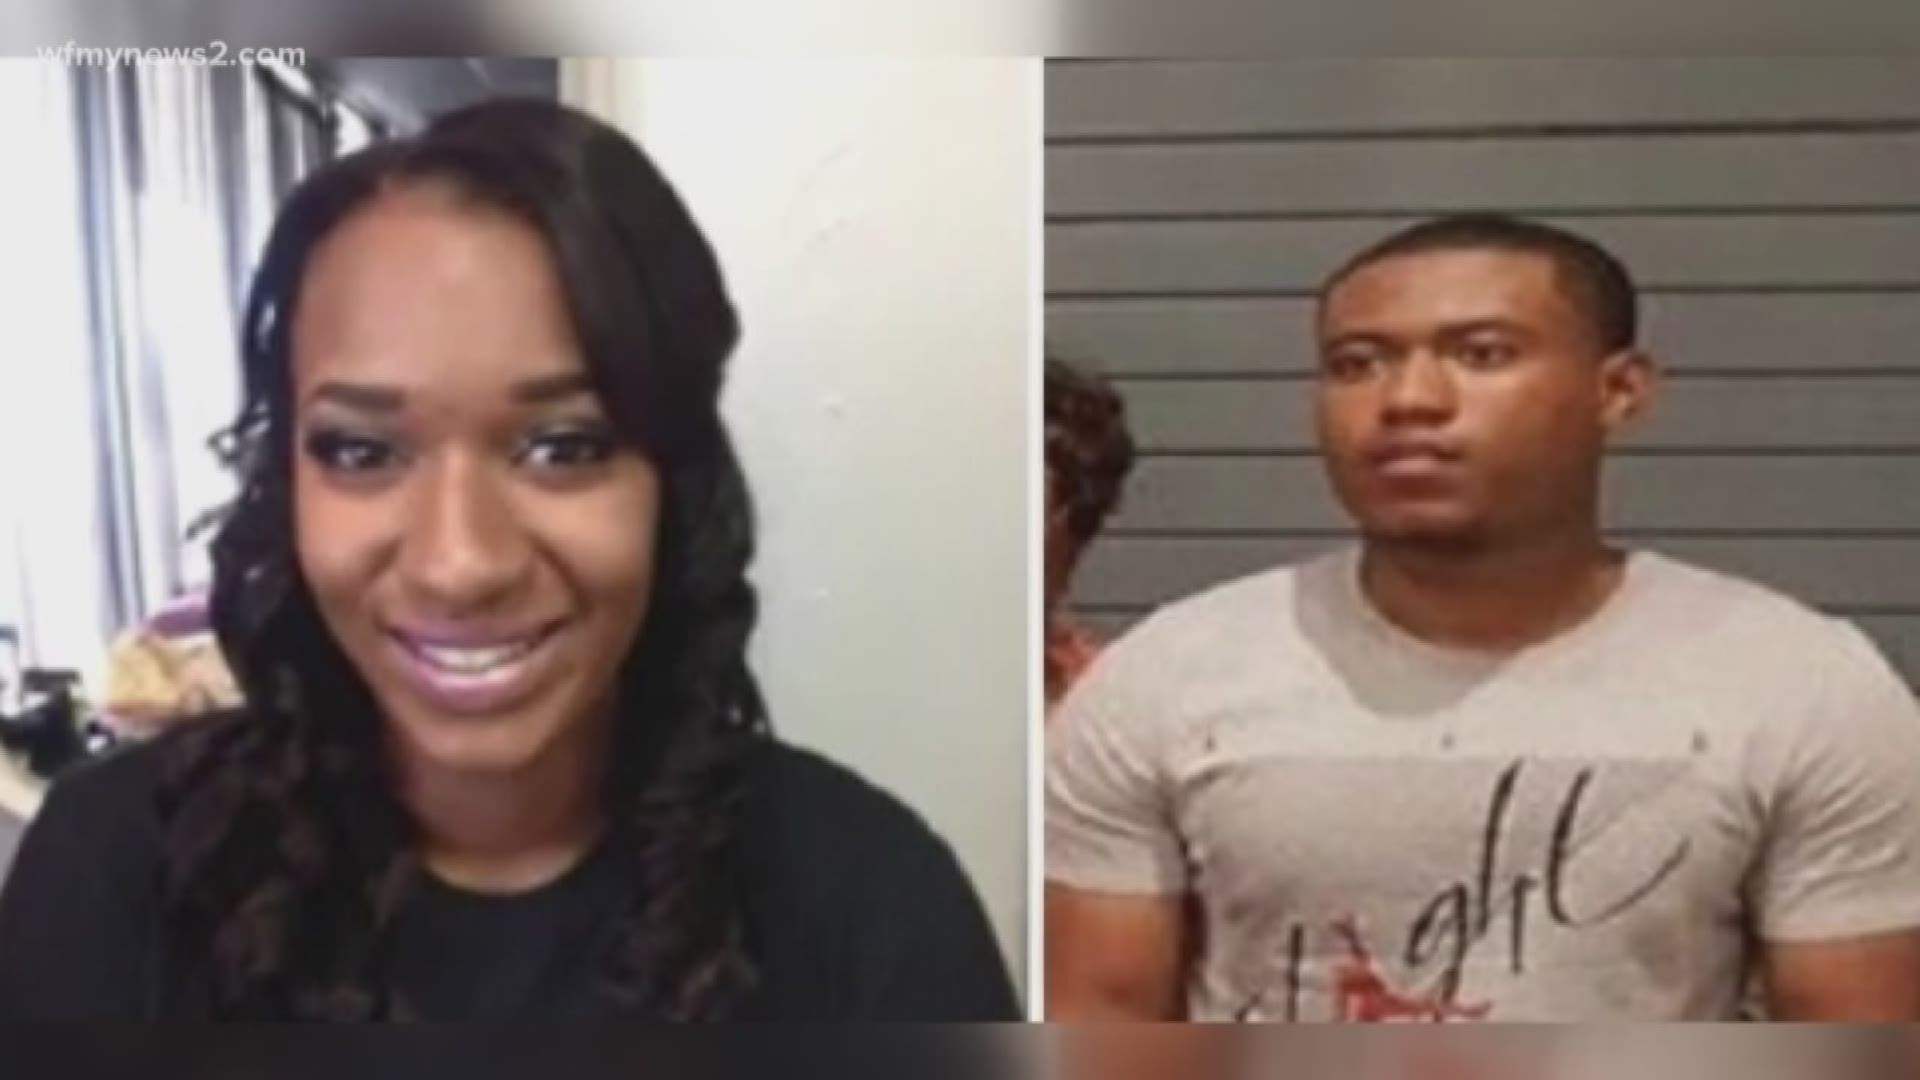 Alisia Dieudonne and Ahmad Campbell were shot at an off-campus party on homecoming weekend almost two years ago.